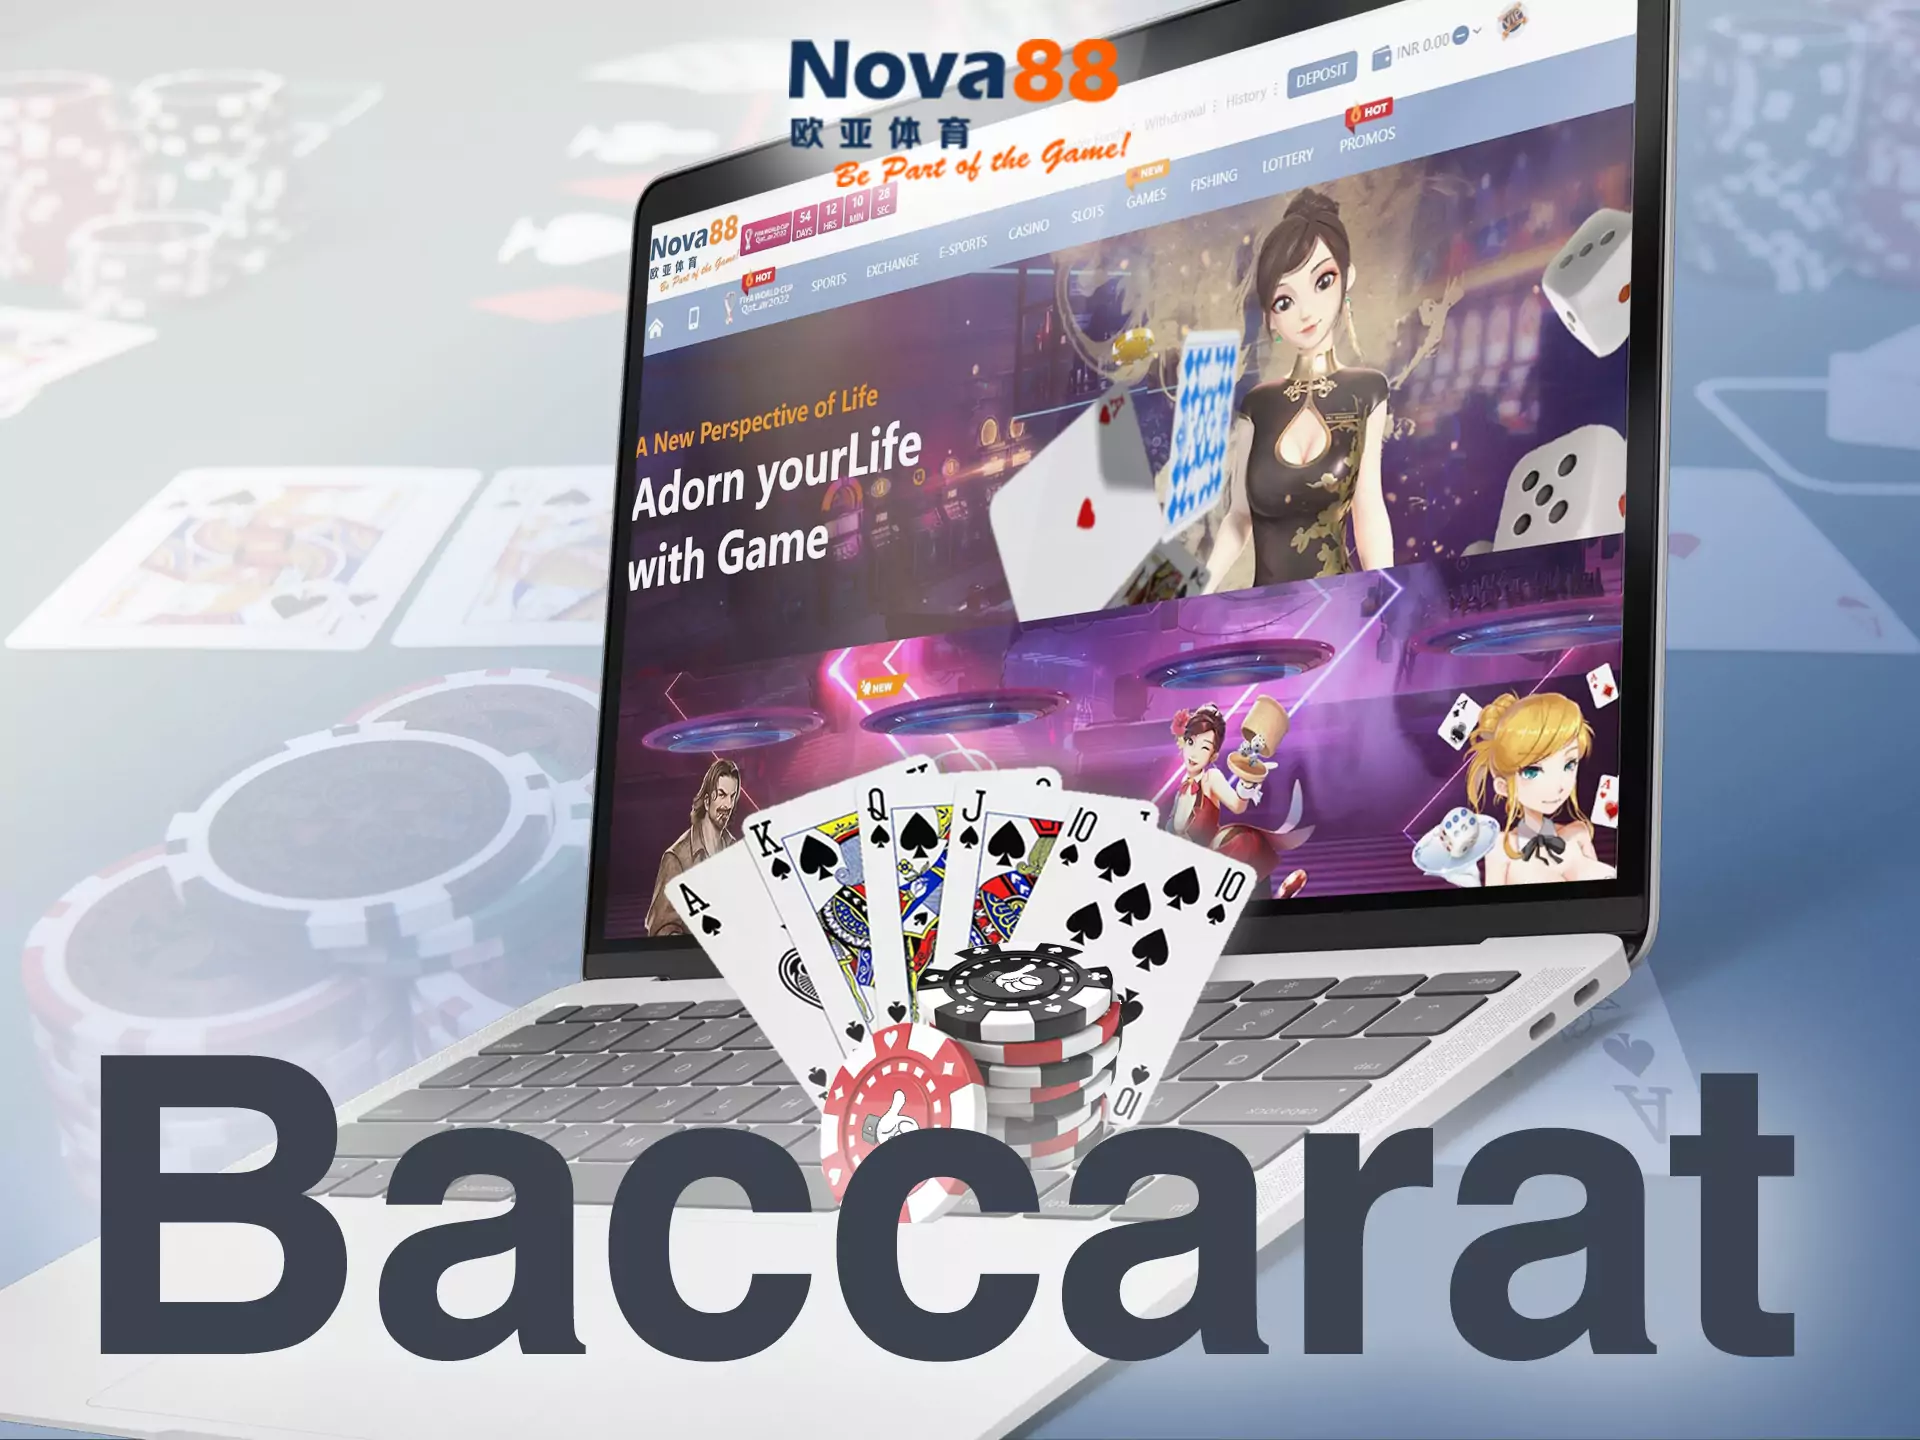 In the Nova88 casino, you can play the games of baccarat.